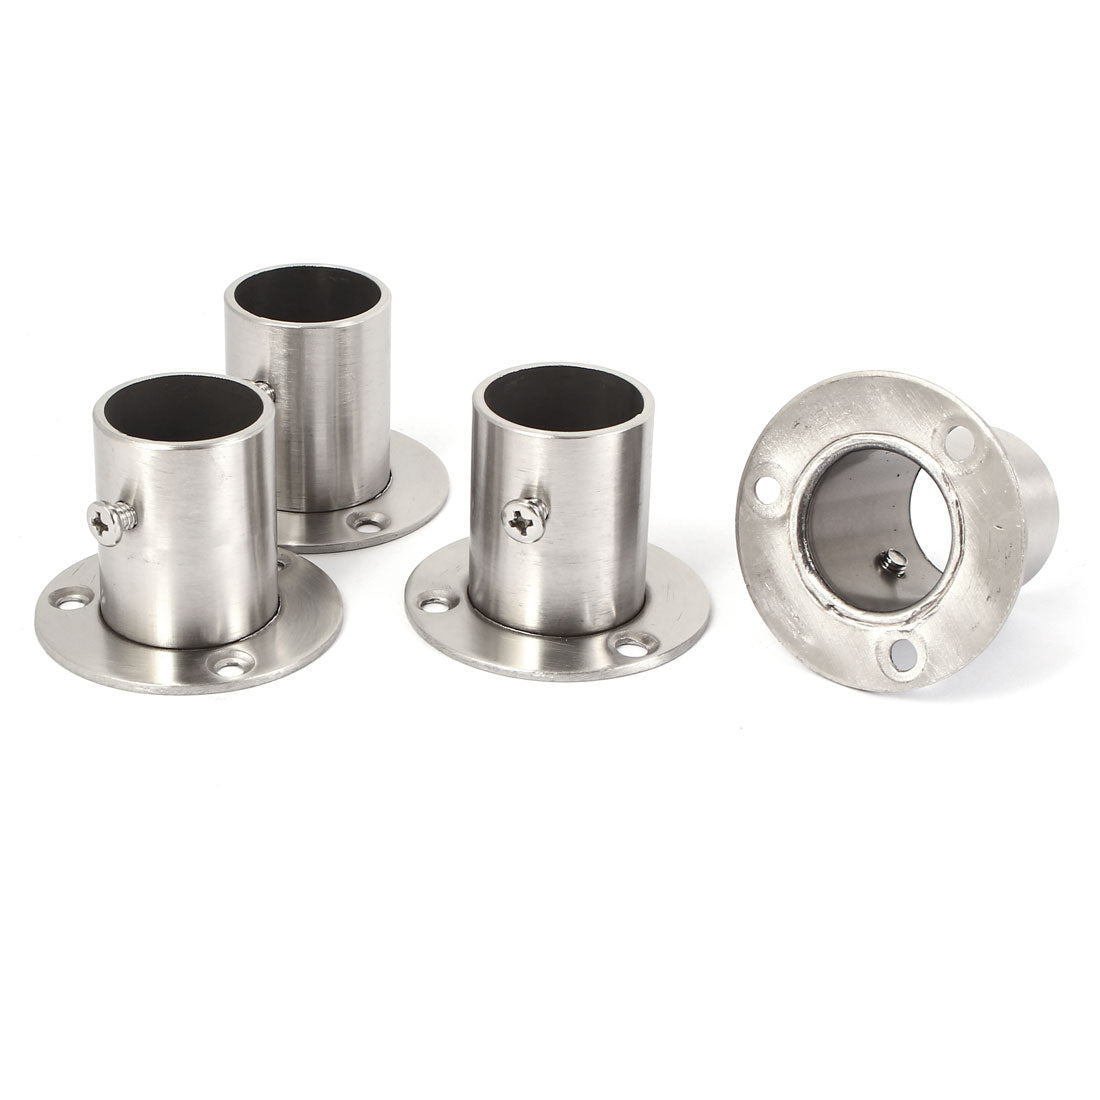 uxcell Uxcell Wardrobe Stainless Steel Hanging Rail Socket End Support 4pcs for 25mm Dia Tube